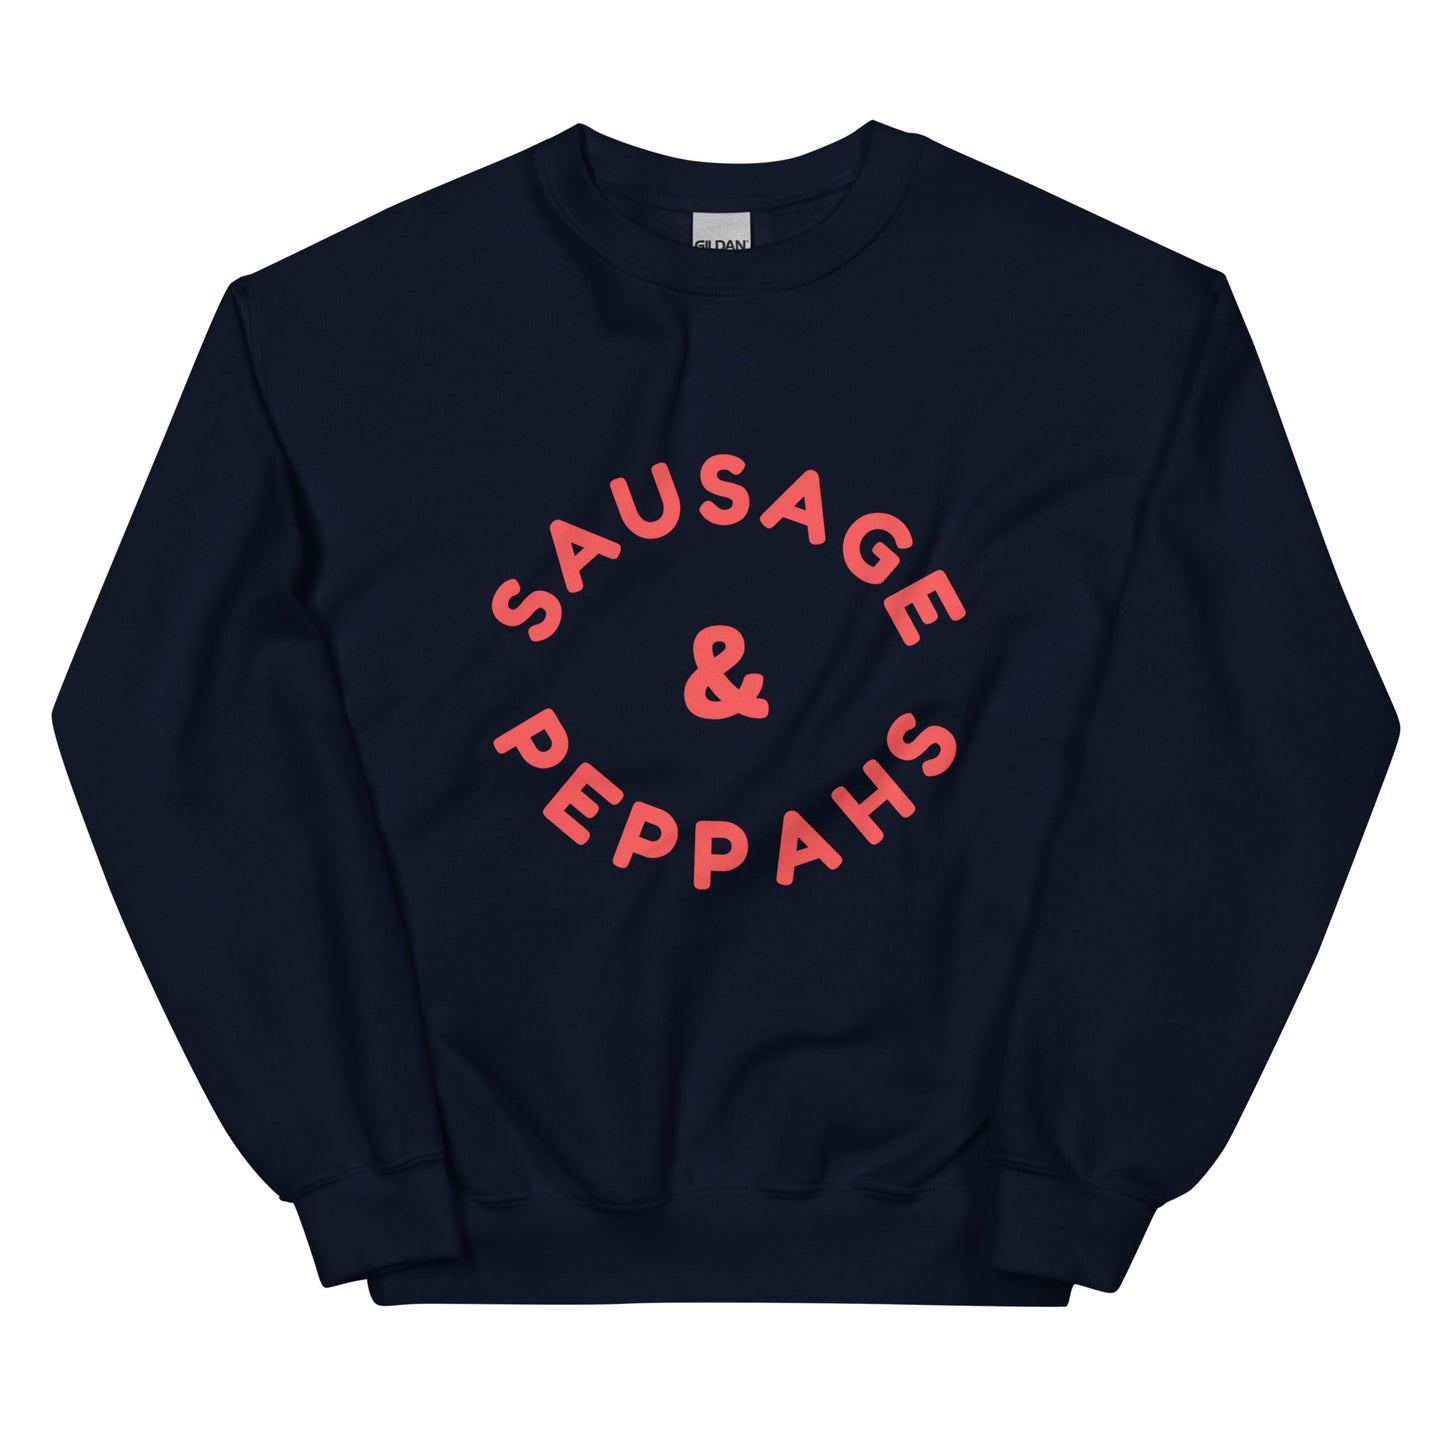 navy crewneck that says "sausage and peppahs" in red lettering